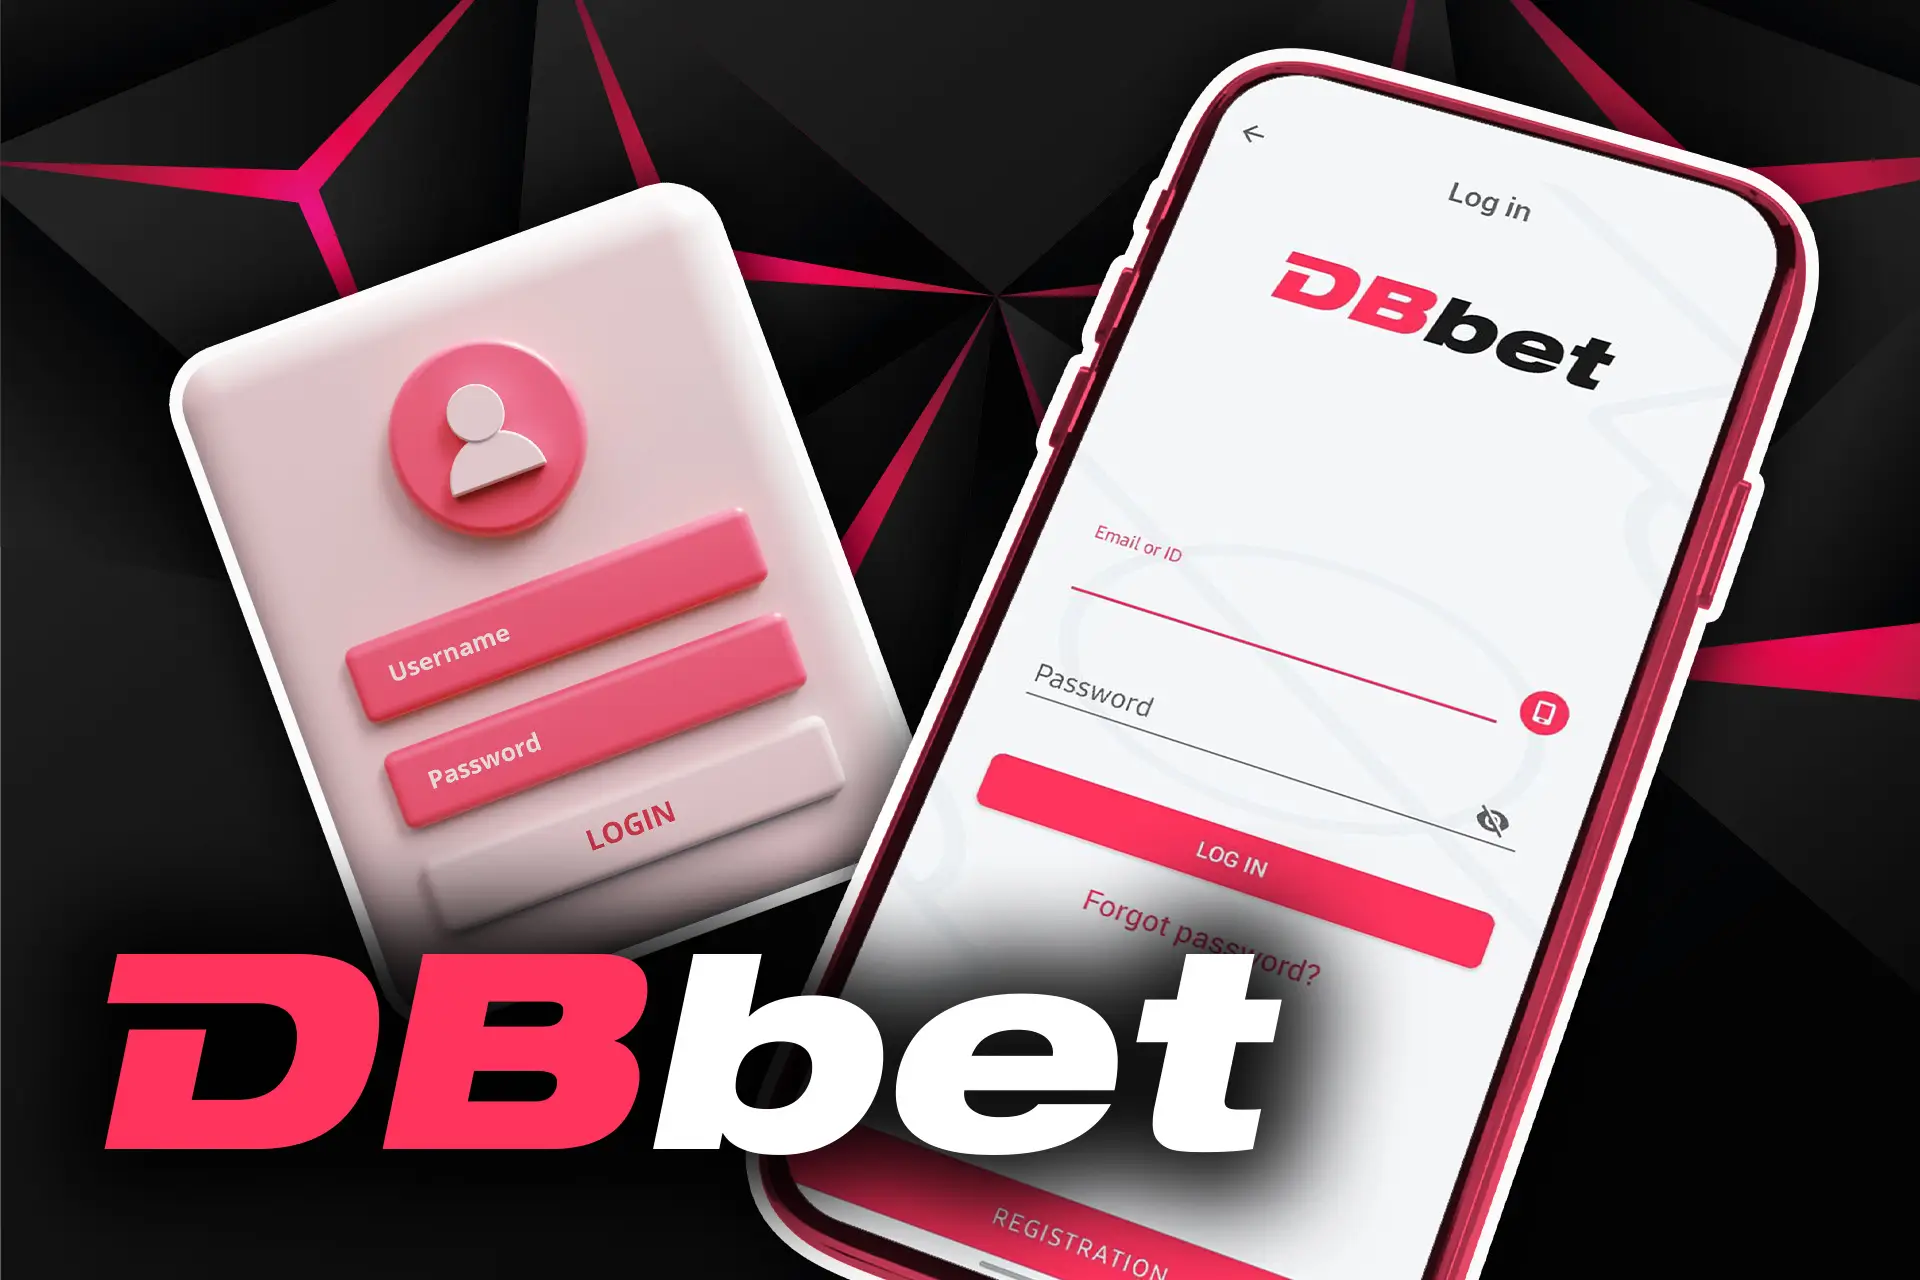 Log in to your DBbet app account to access all features.